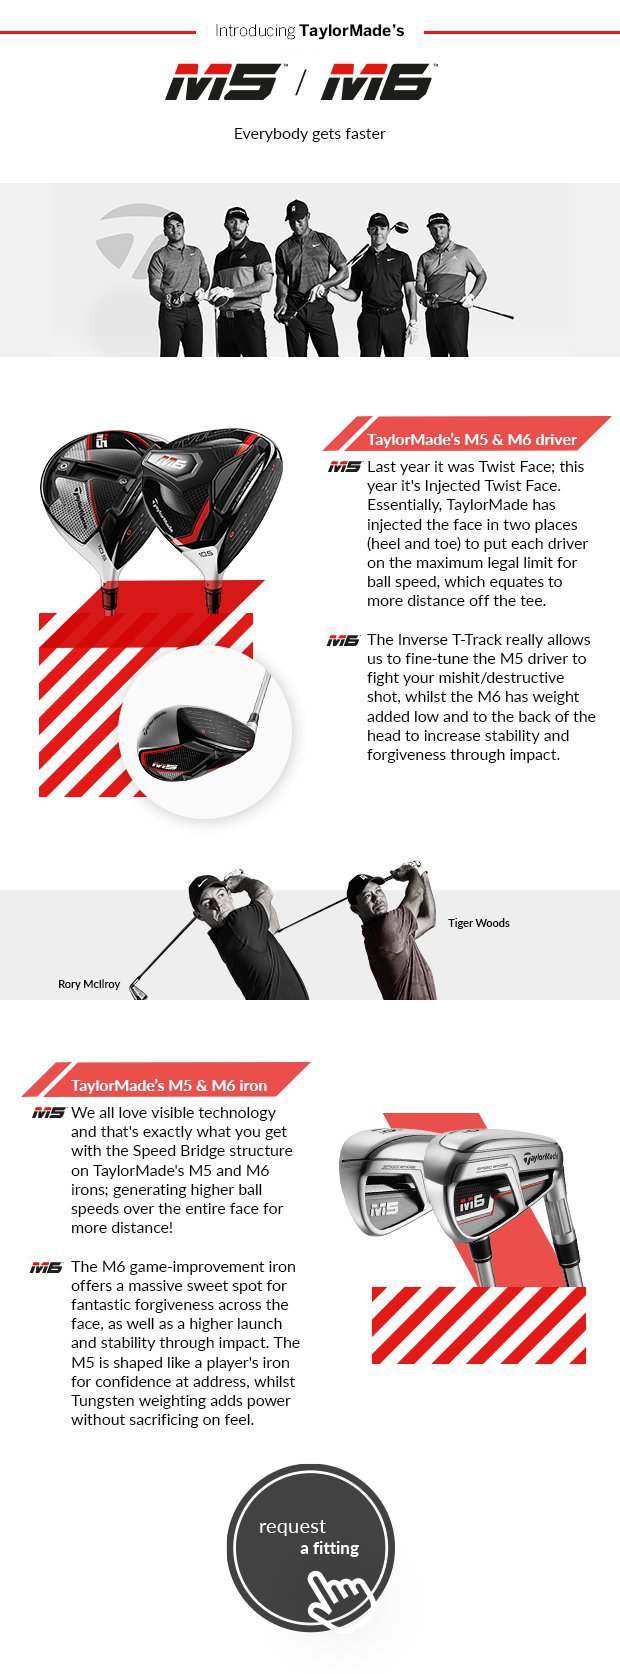 Introducing TaylorMade's M5/M6. Everybody gets faster.